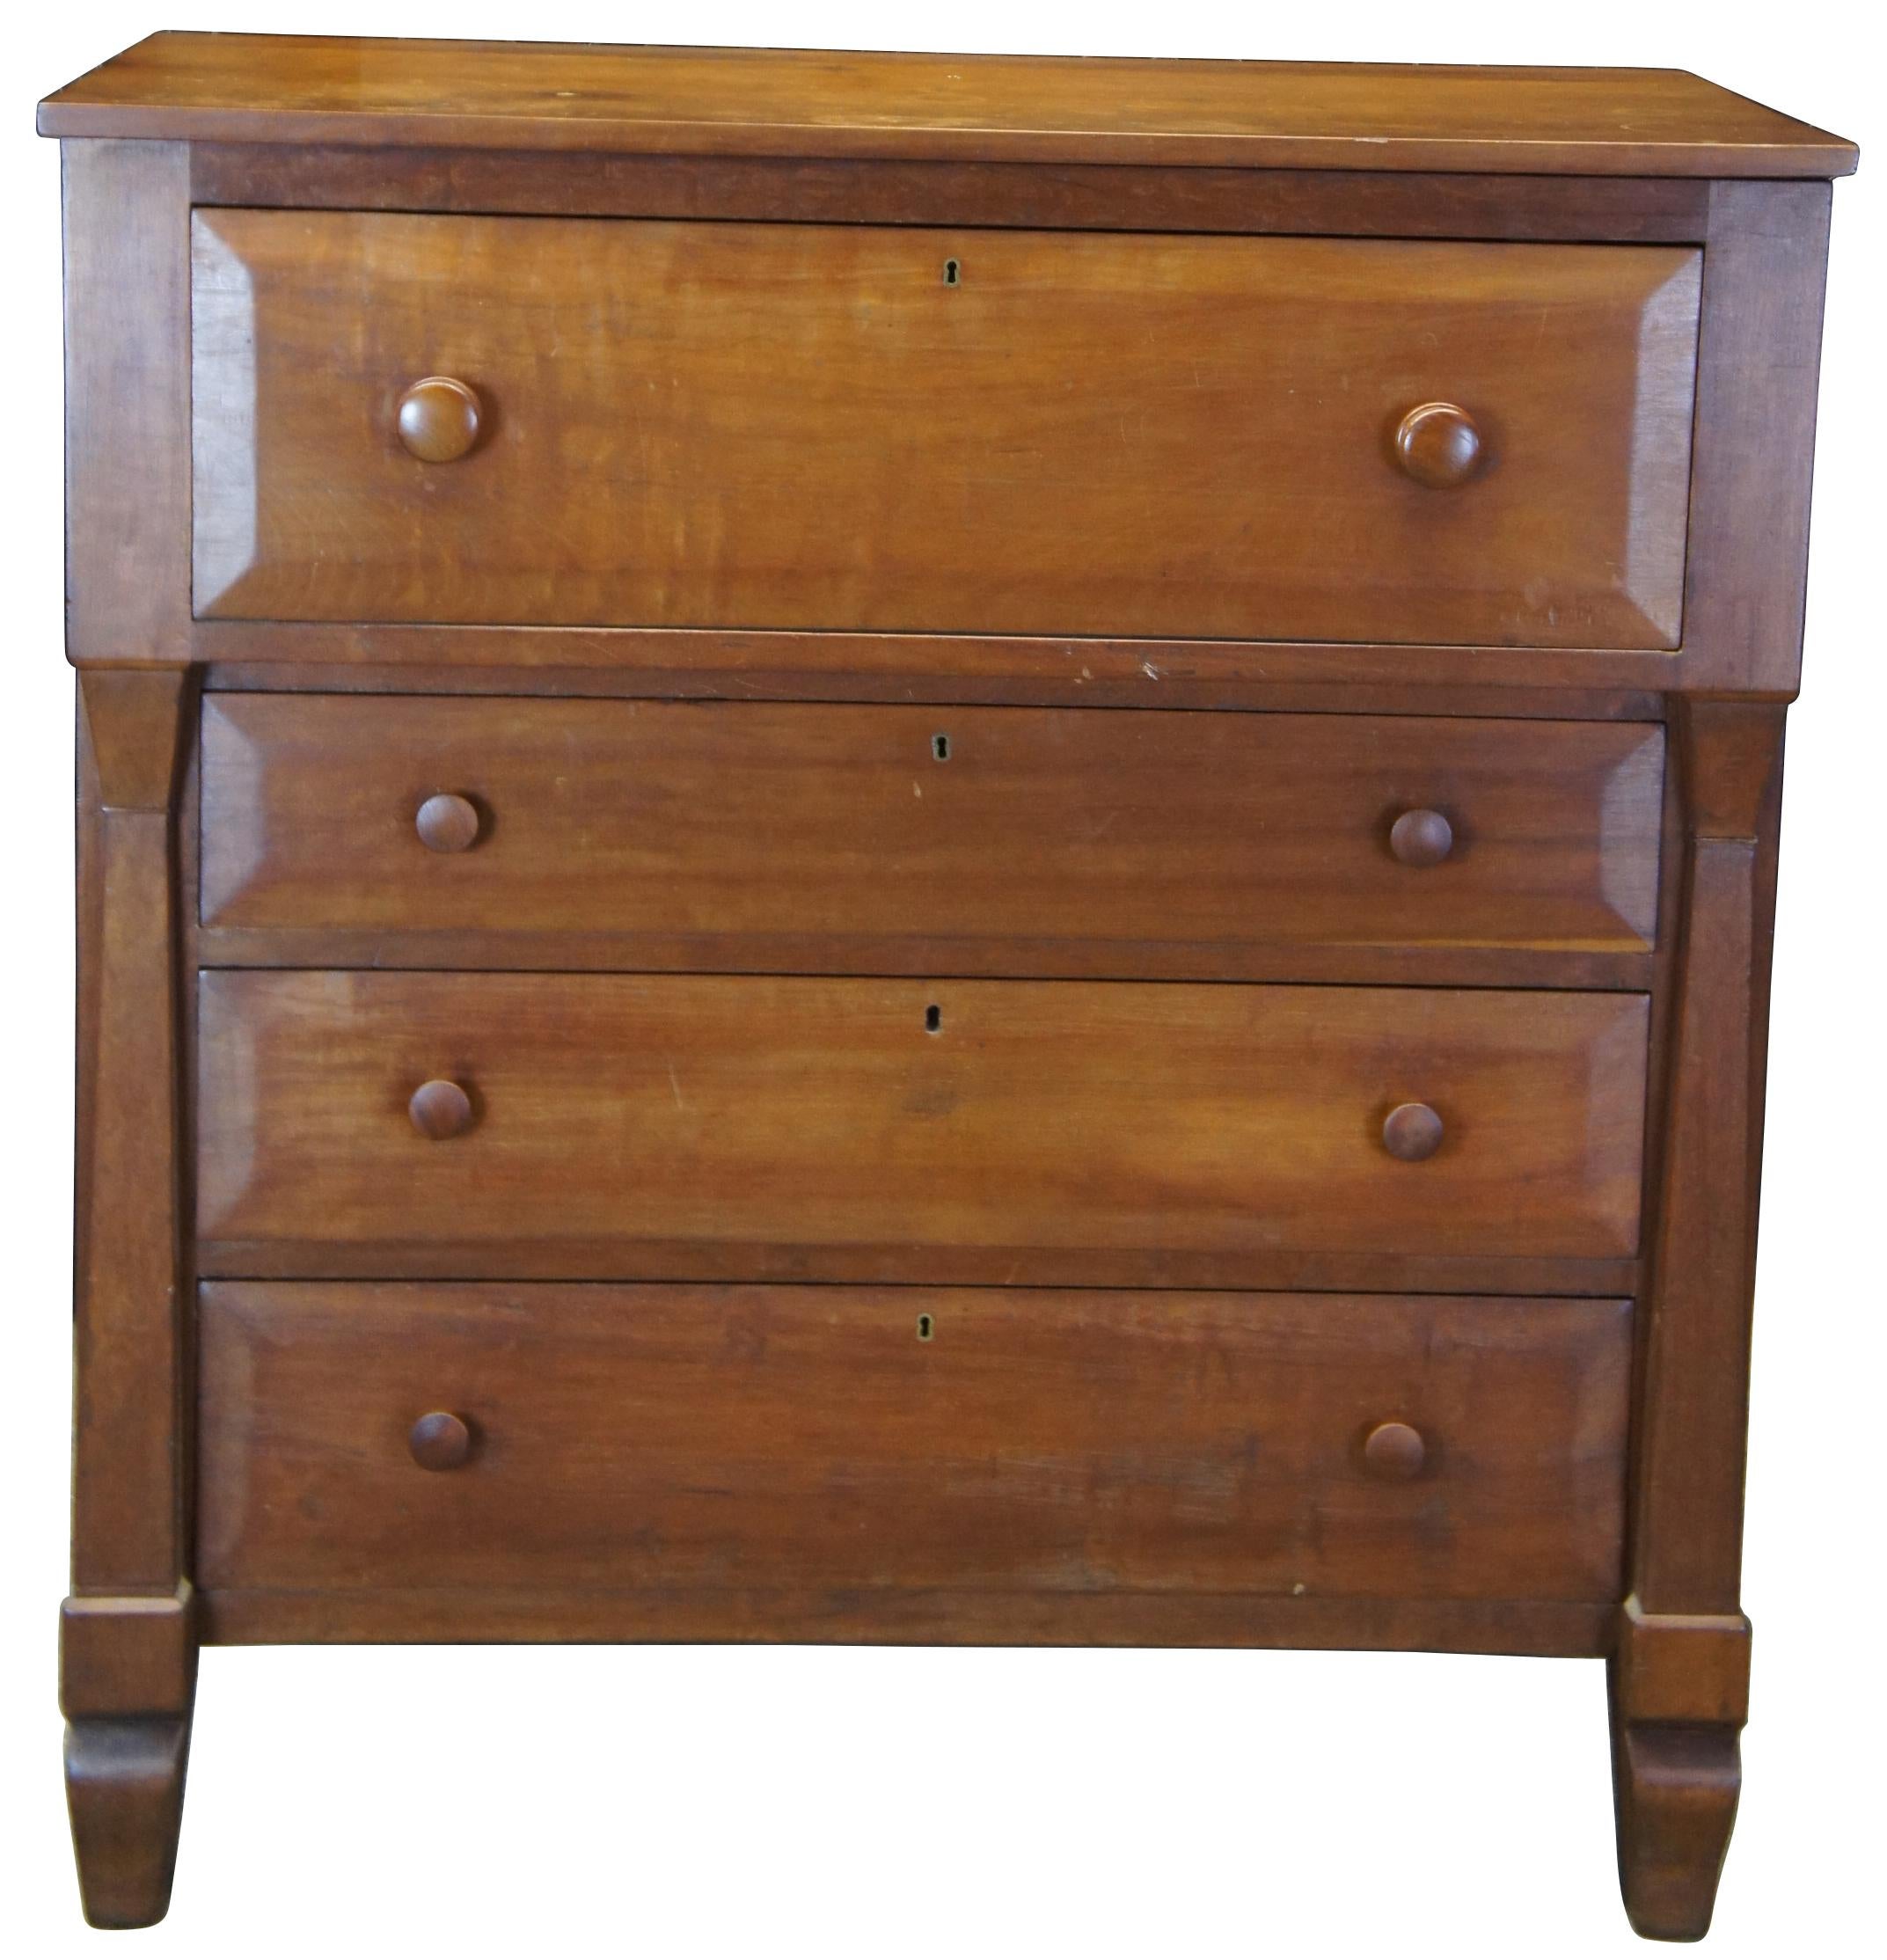 American Empire tall chest, circa 1850s. Features a rectangular form with a pronounced top. Includes beveled drawer fronts, hand dovetailing and square tapered columns along the front. Made from walnut.
       